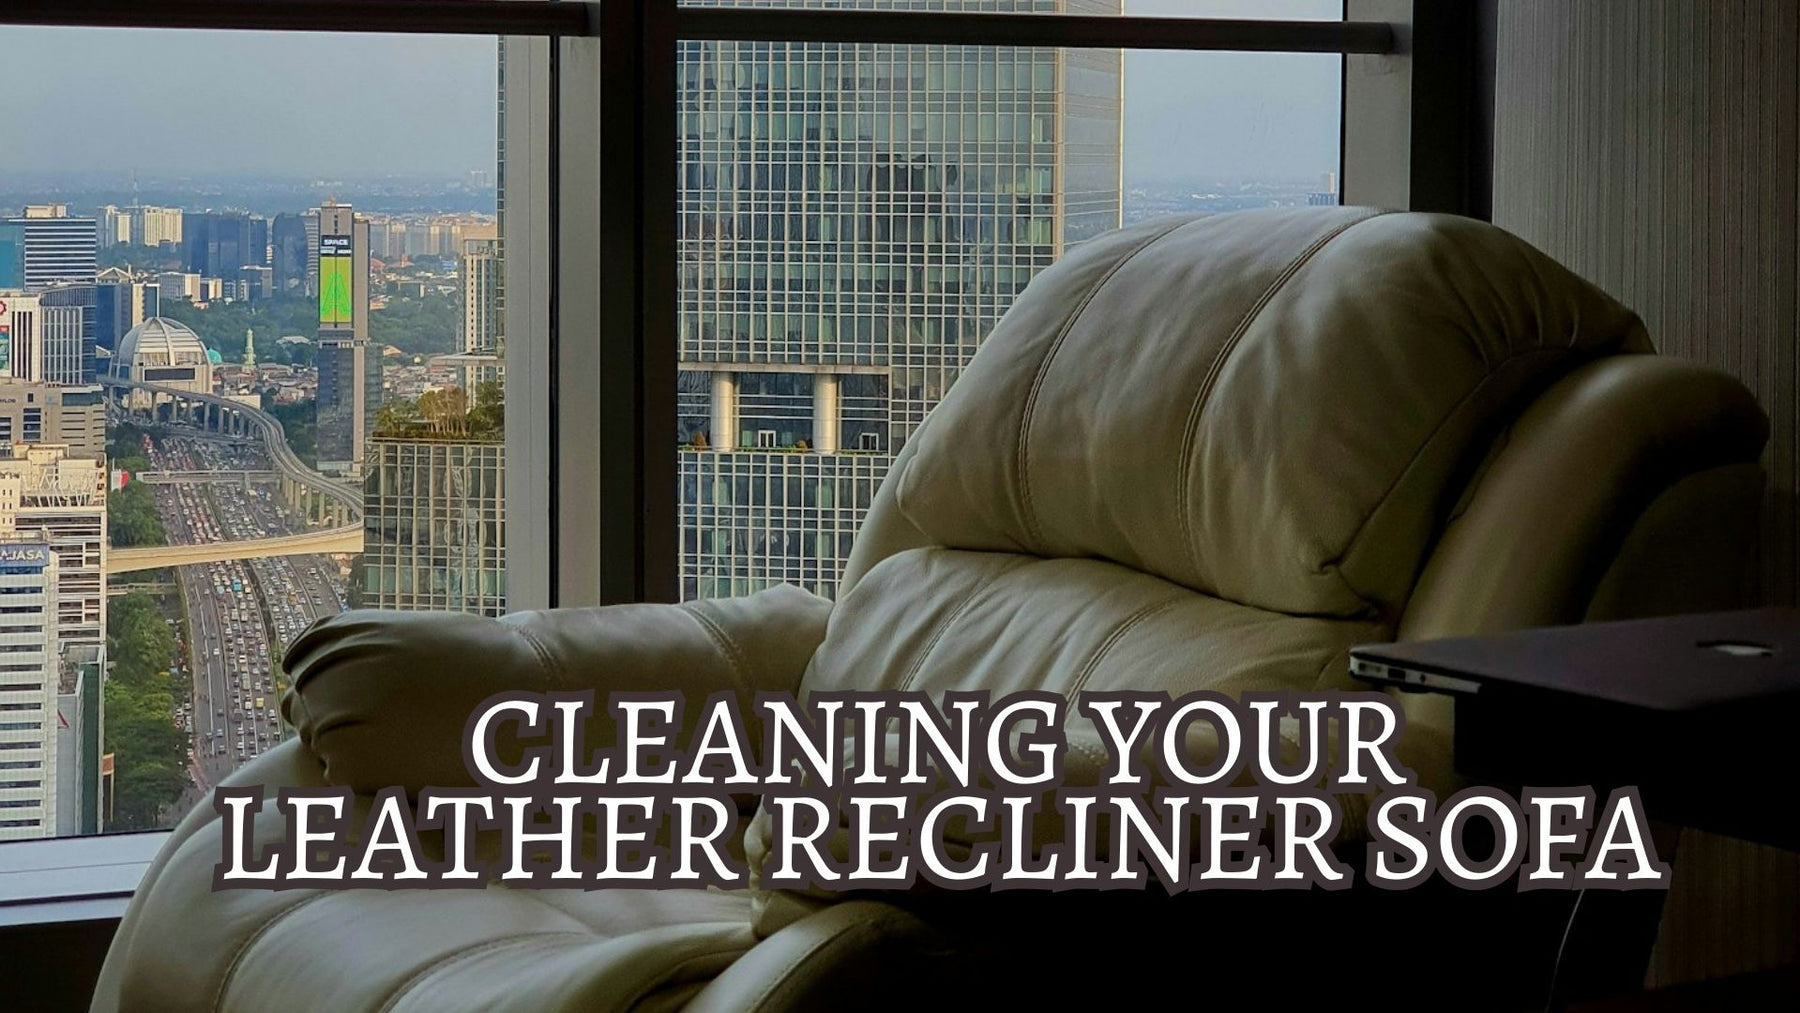 Maintaining and Cleaning Your Leather Recliner Sofa: Tips and Tricks